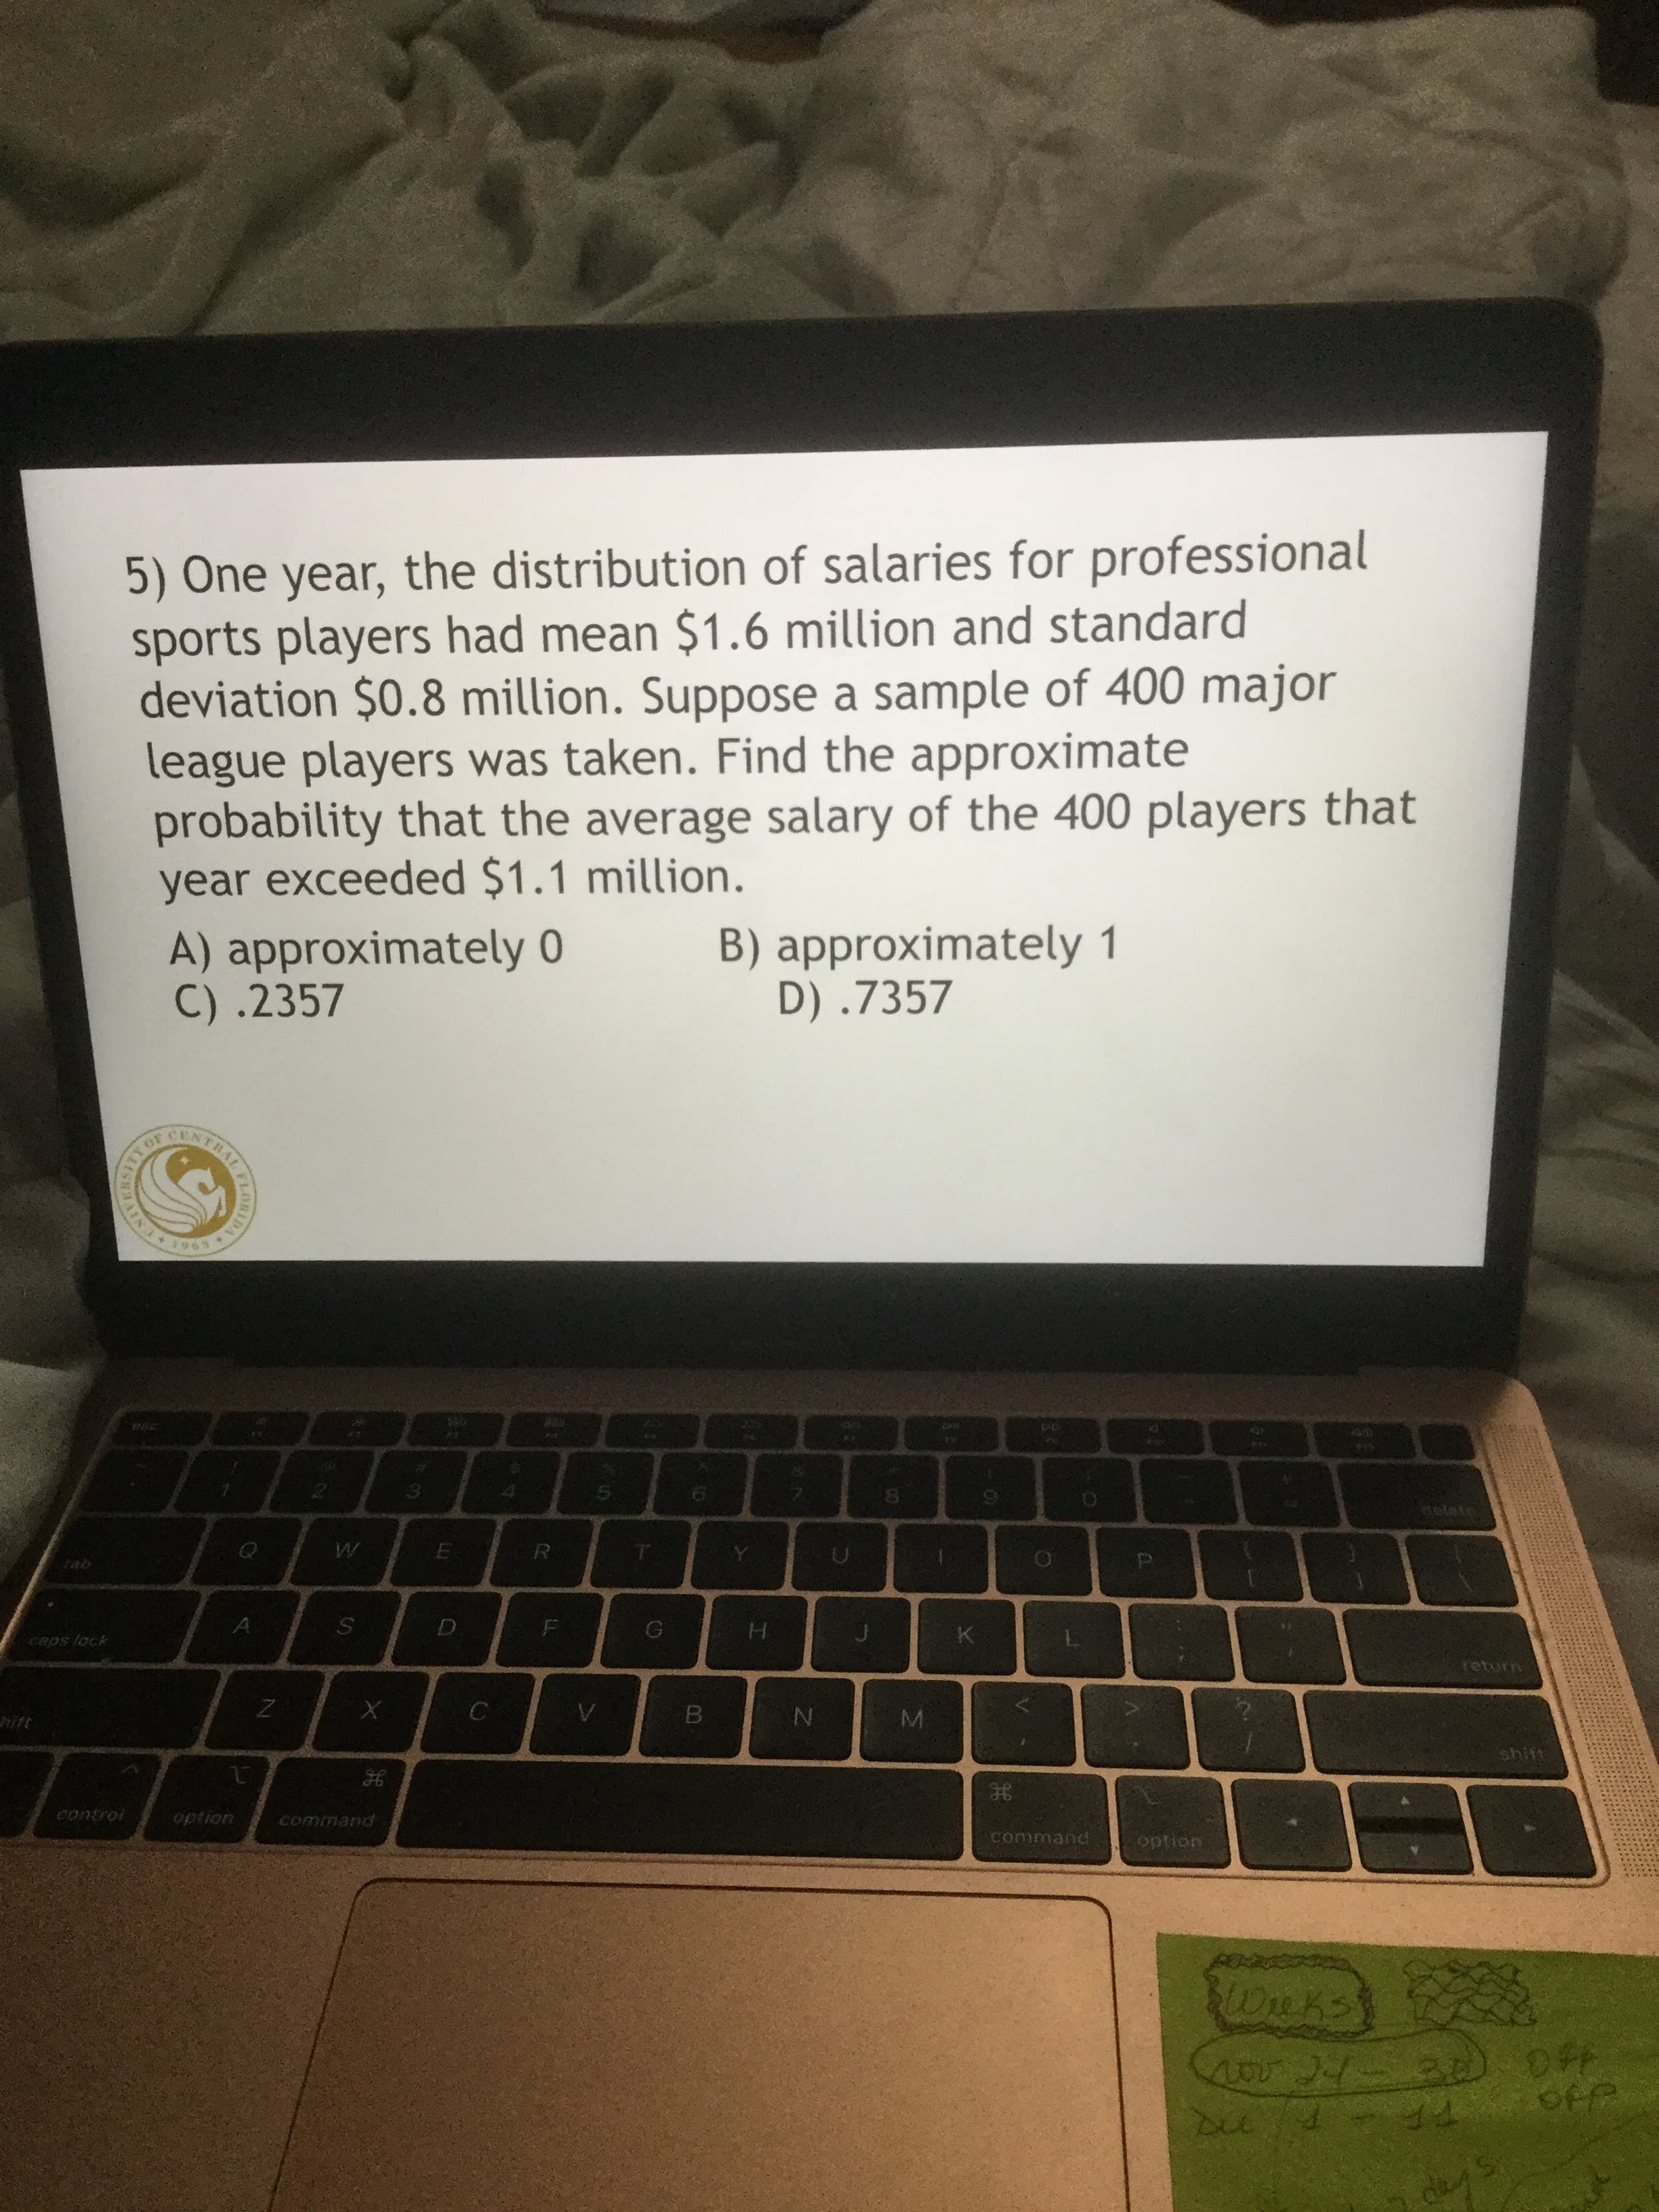 5) One year, the distribution of salaries for professional
sports players had mean $1.6 million and standard
deviation $0.8 million. Suppose a sample of 400 major
league players was taken. Find the approximate
probability that the average salary of the 400 players that
year exceeded $1.1 million.
B) approximately 1
D) .7357
A) approximately 0
C) .2357
CENTRAL
5.
tab
H.
caps lock
return
hift
shift
control
option
command
command
optian
4o21-30 OFF
OFP
des
ELORIDA
RAIN
